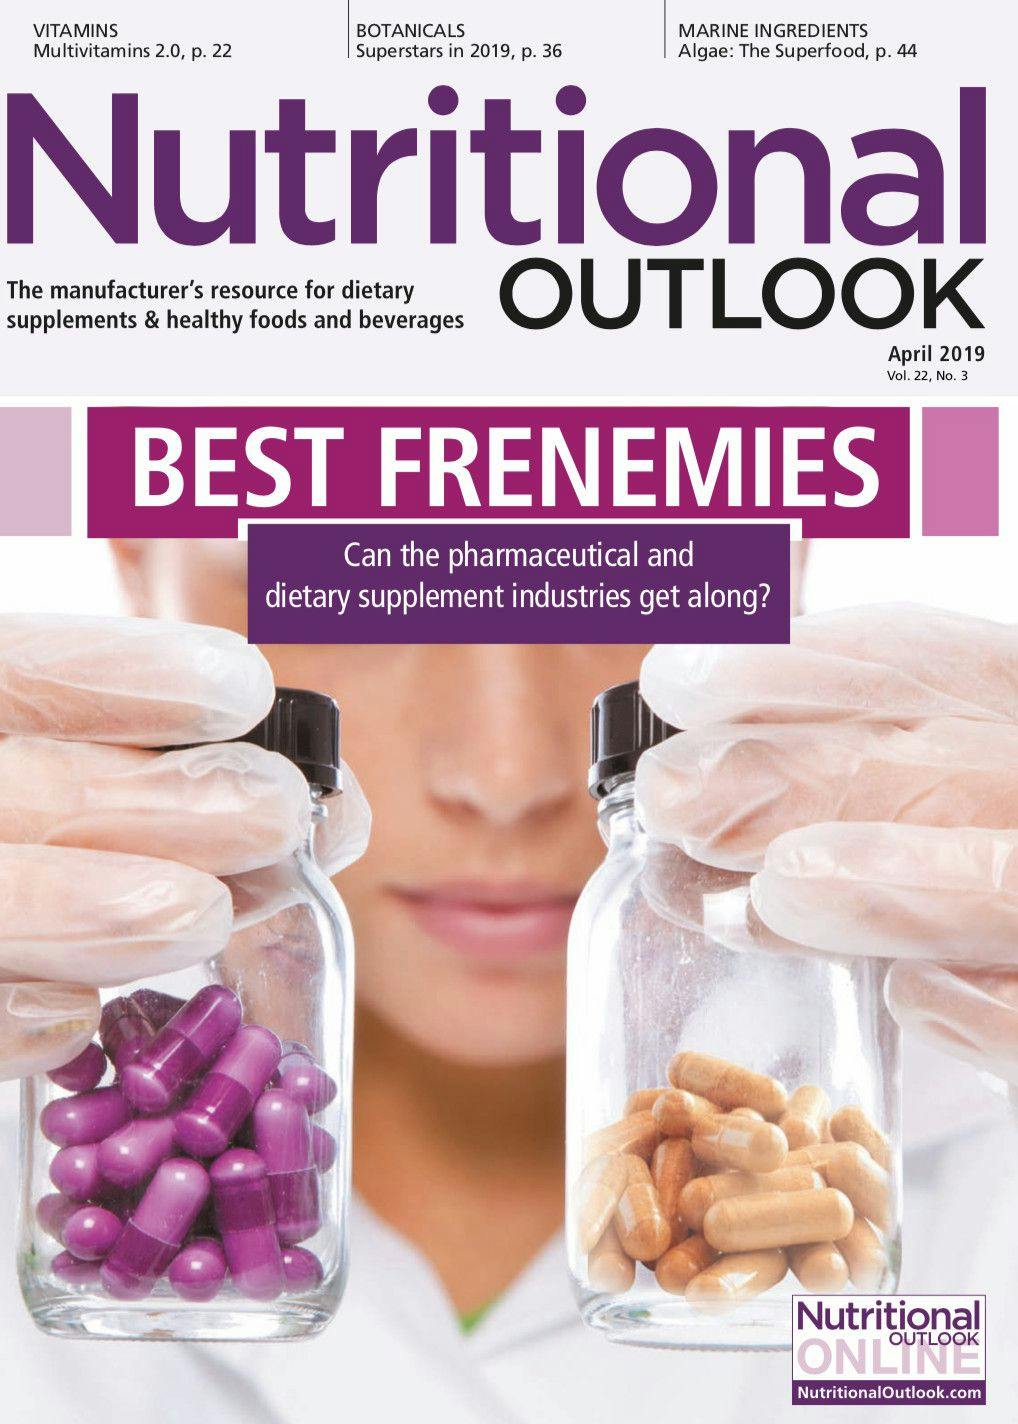 Nutritional Outlook Vol. 22 No. 3